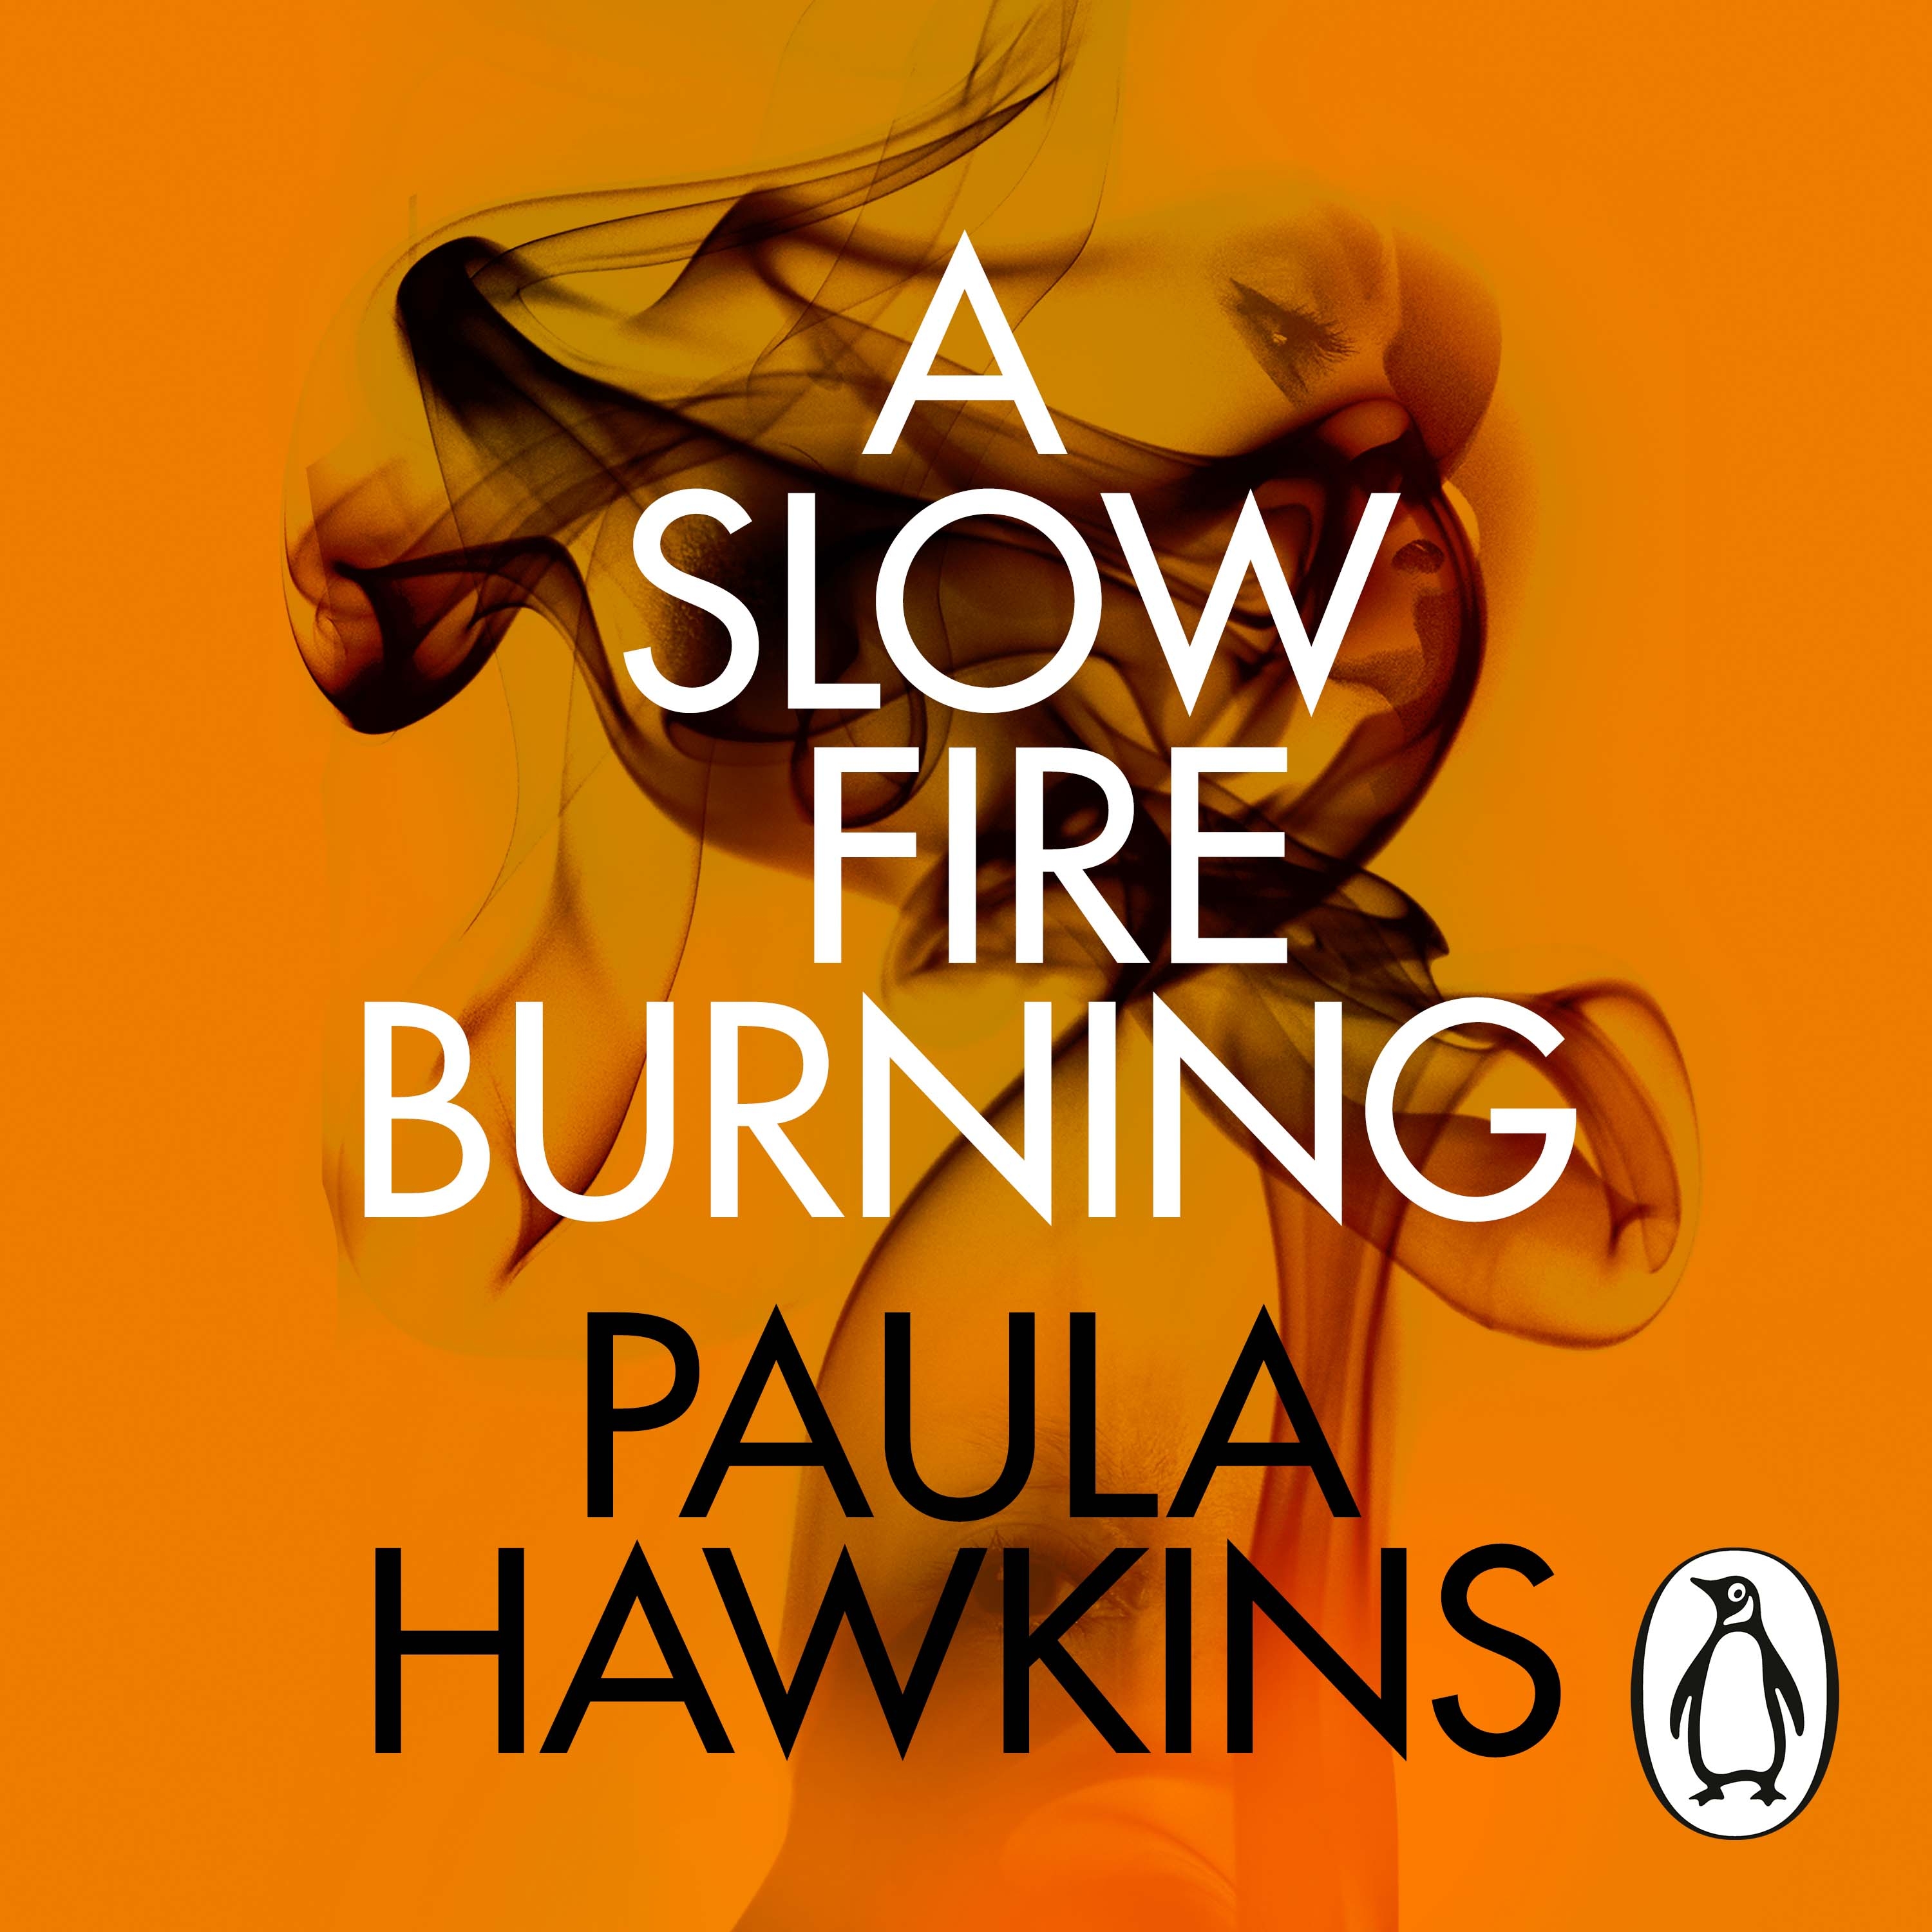 Cover of A Slow Fire Burning by Paula Hawkins. Black smoke blooms upwards against an orange background. The title is stacked in white down the centre, and the author's name is in black at the bottom.